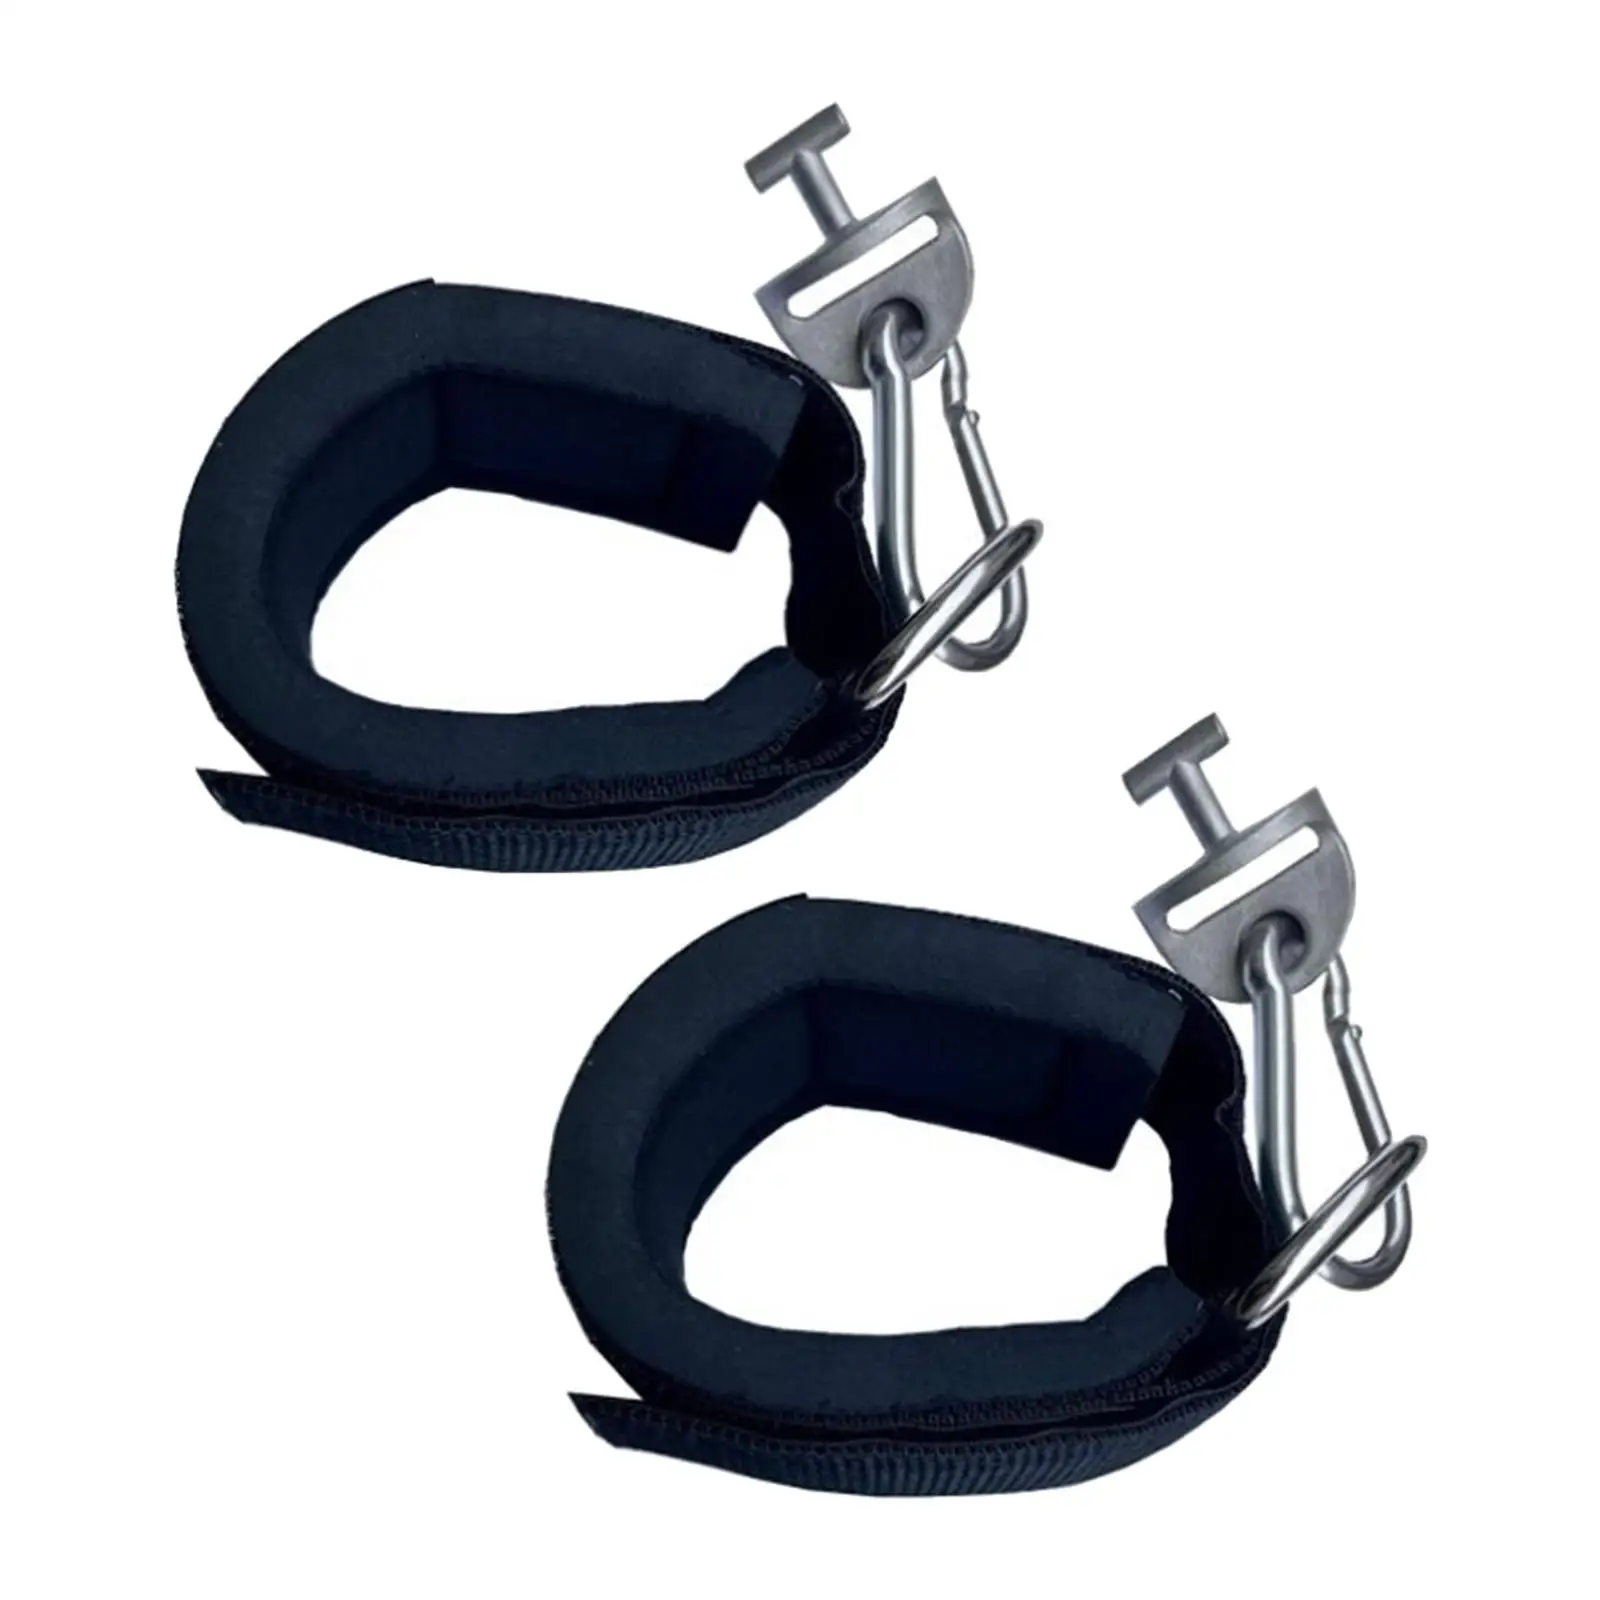 Ankle Straps for Tonal Cable Machine with Tonal Adapters Snap Hooks Foot Support